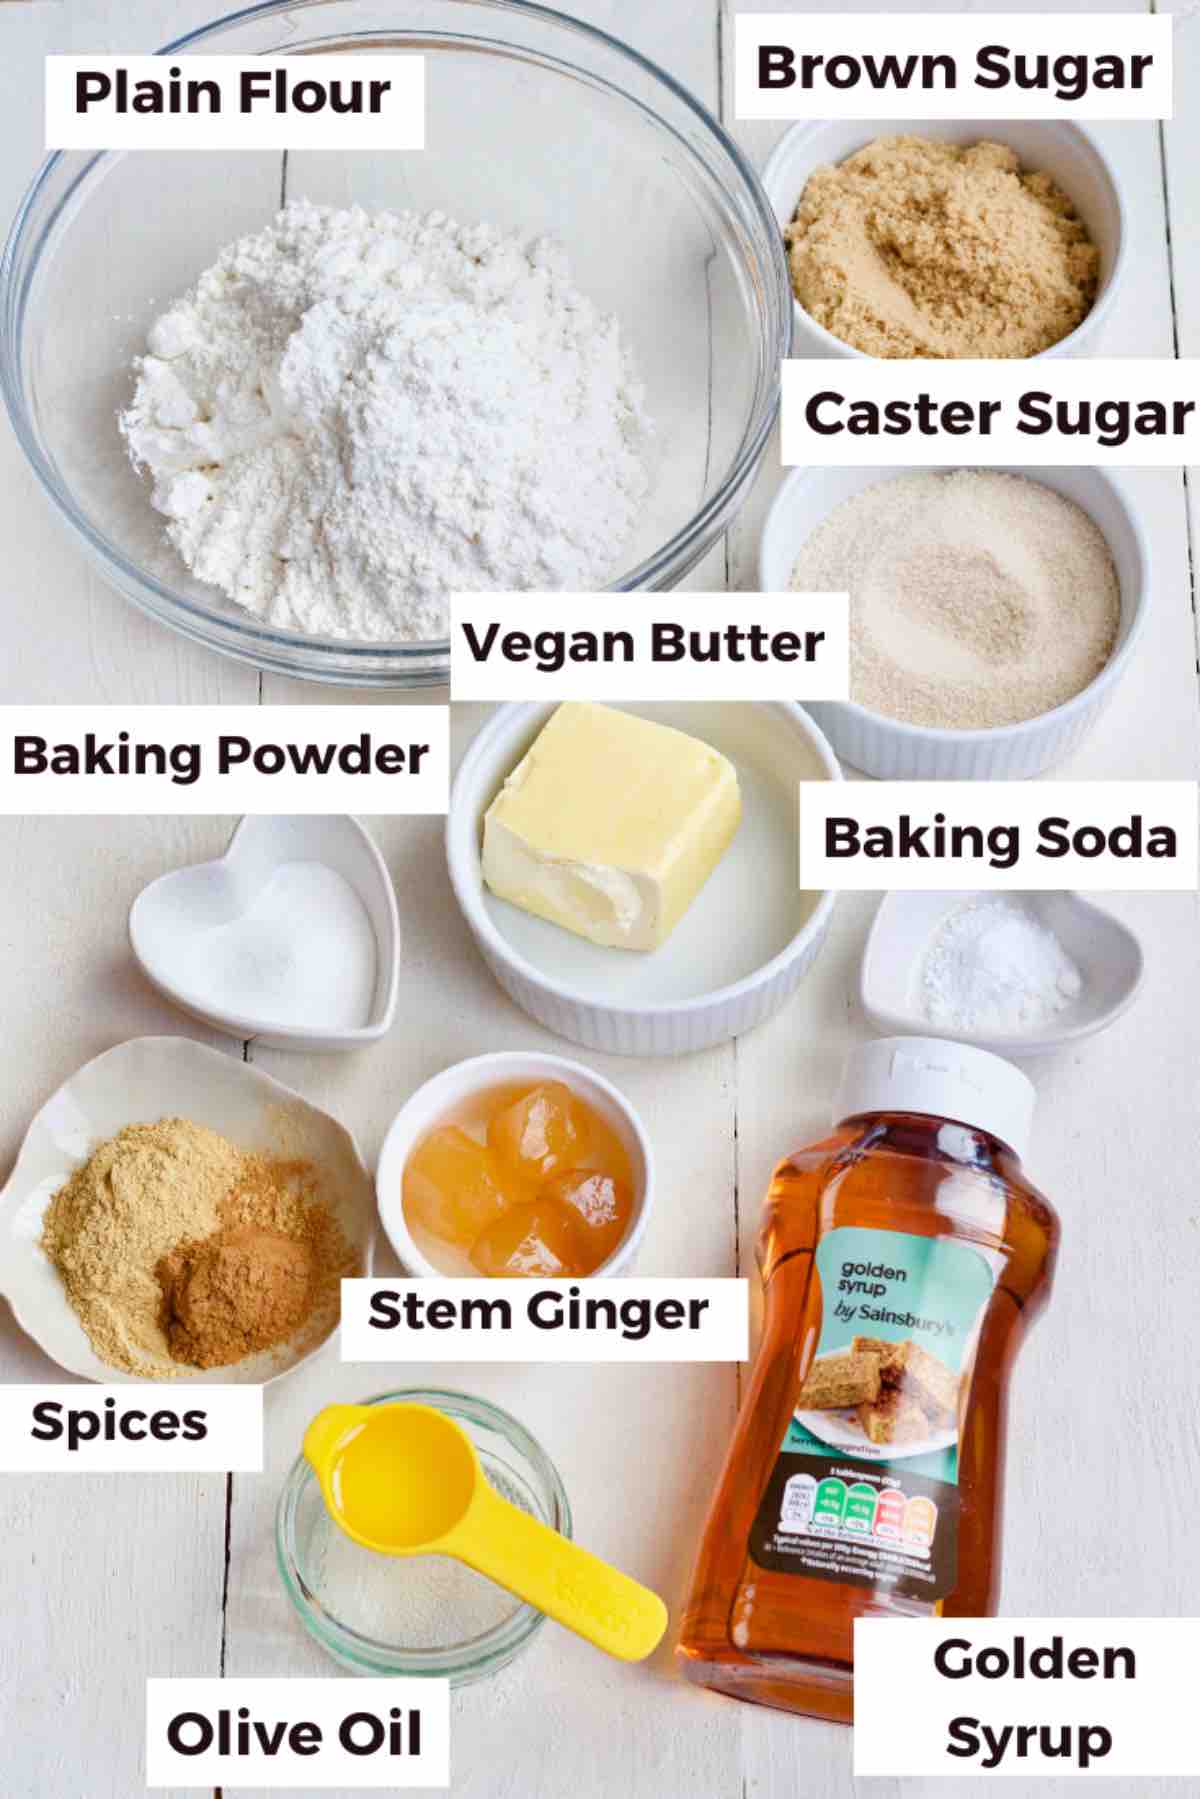 Ingredients for baking ginger biscuits.